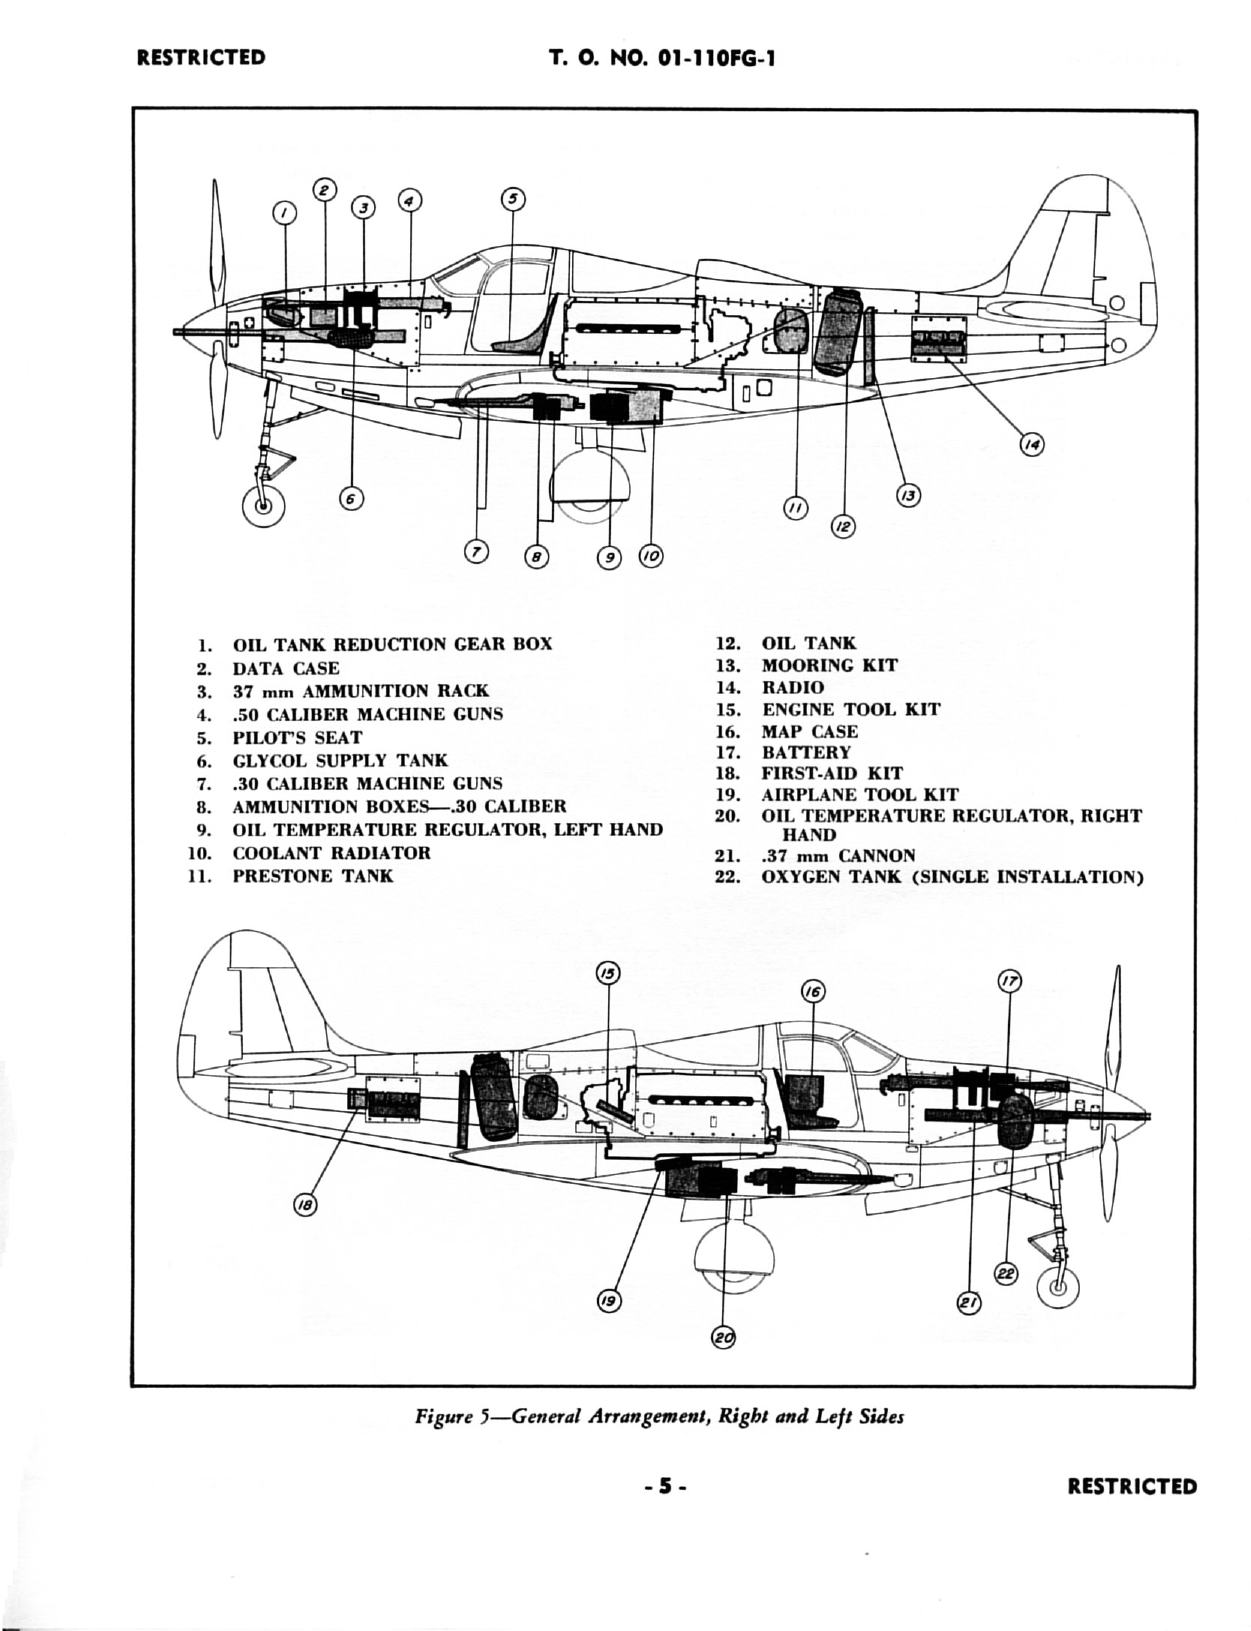 Sample page 7 from AirCorps Library document: Pilot's Flight Operating Instructions for P-39K-1 and P-39L-1 